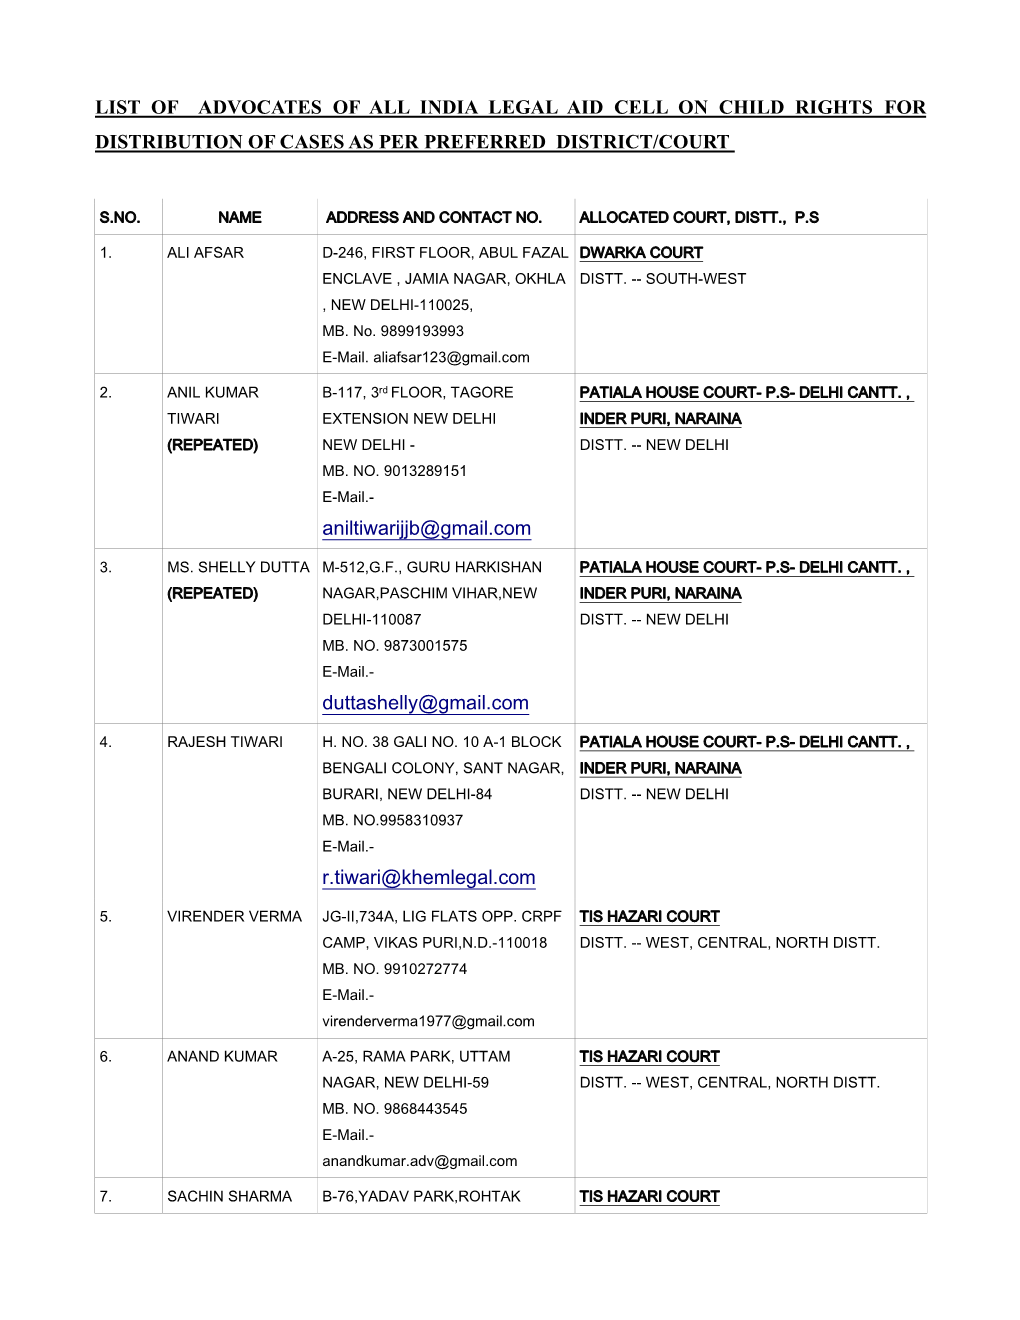 List of Advocates of All India Legal Aid Cell on Child Rights for Distribution of Cases As Per Preferred District/Court